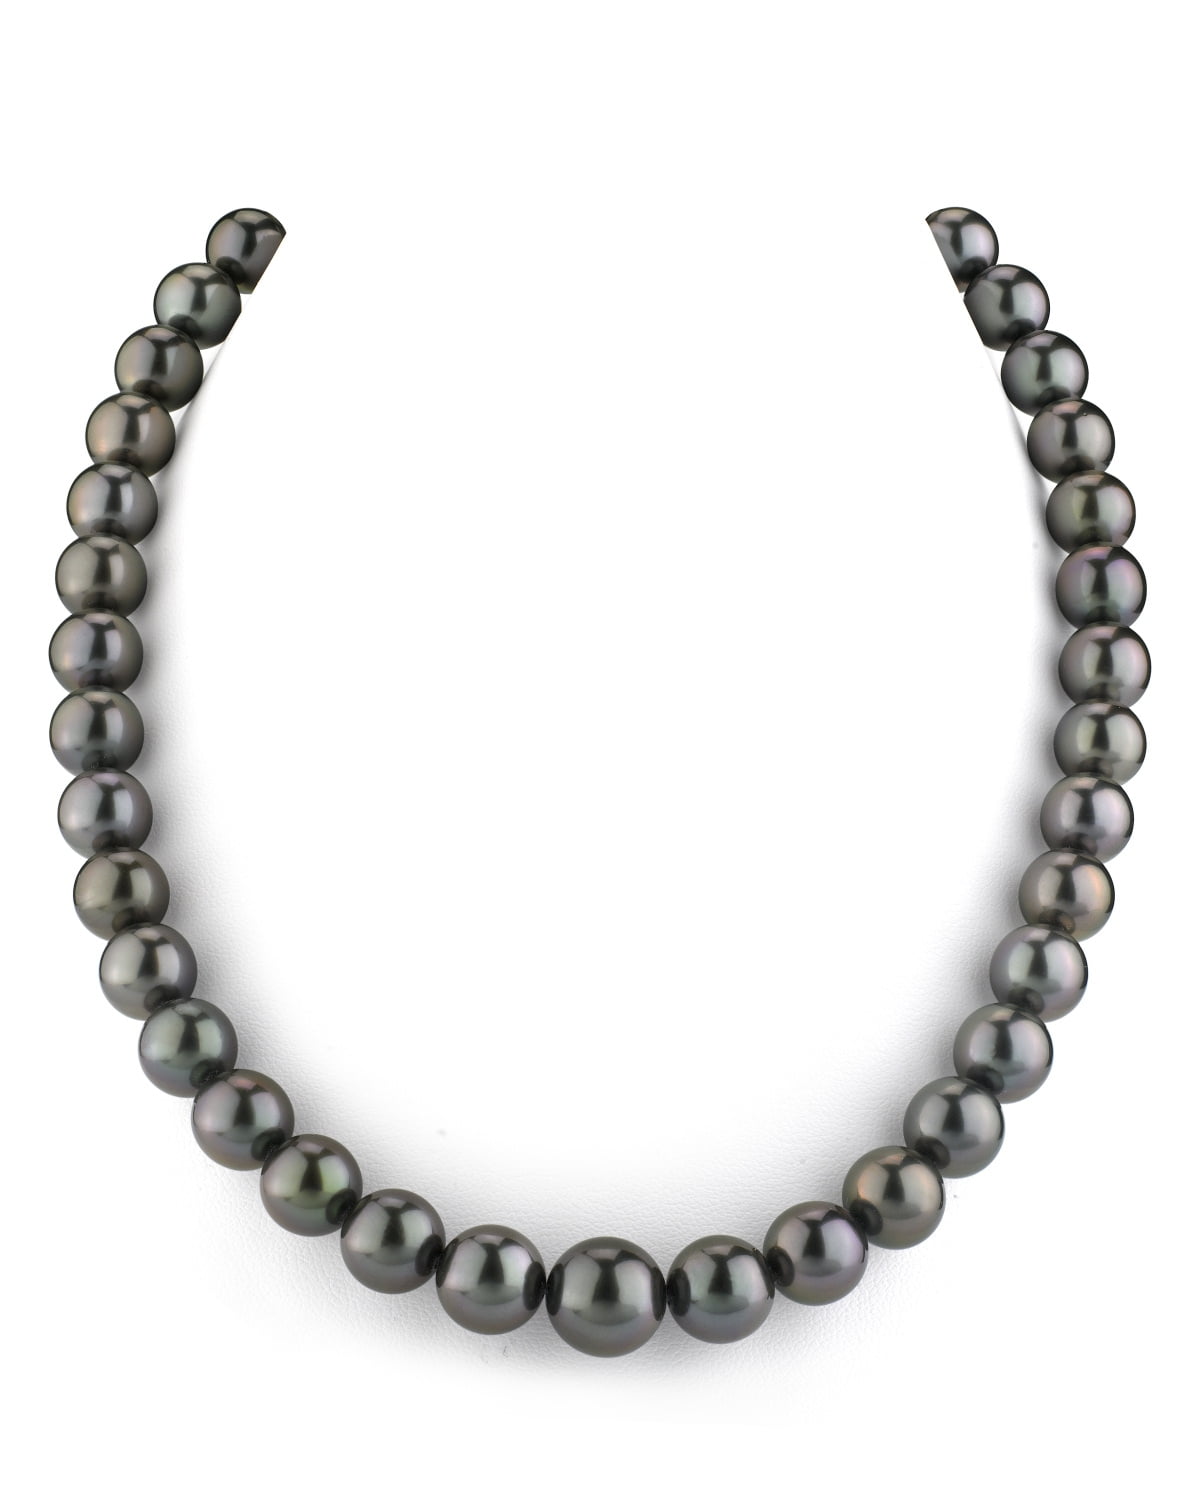 10-11MM CHAMPAGNE NATURAL TAHITIAN PEARL NECKLACE 18" AAA